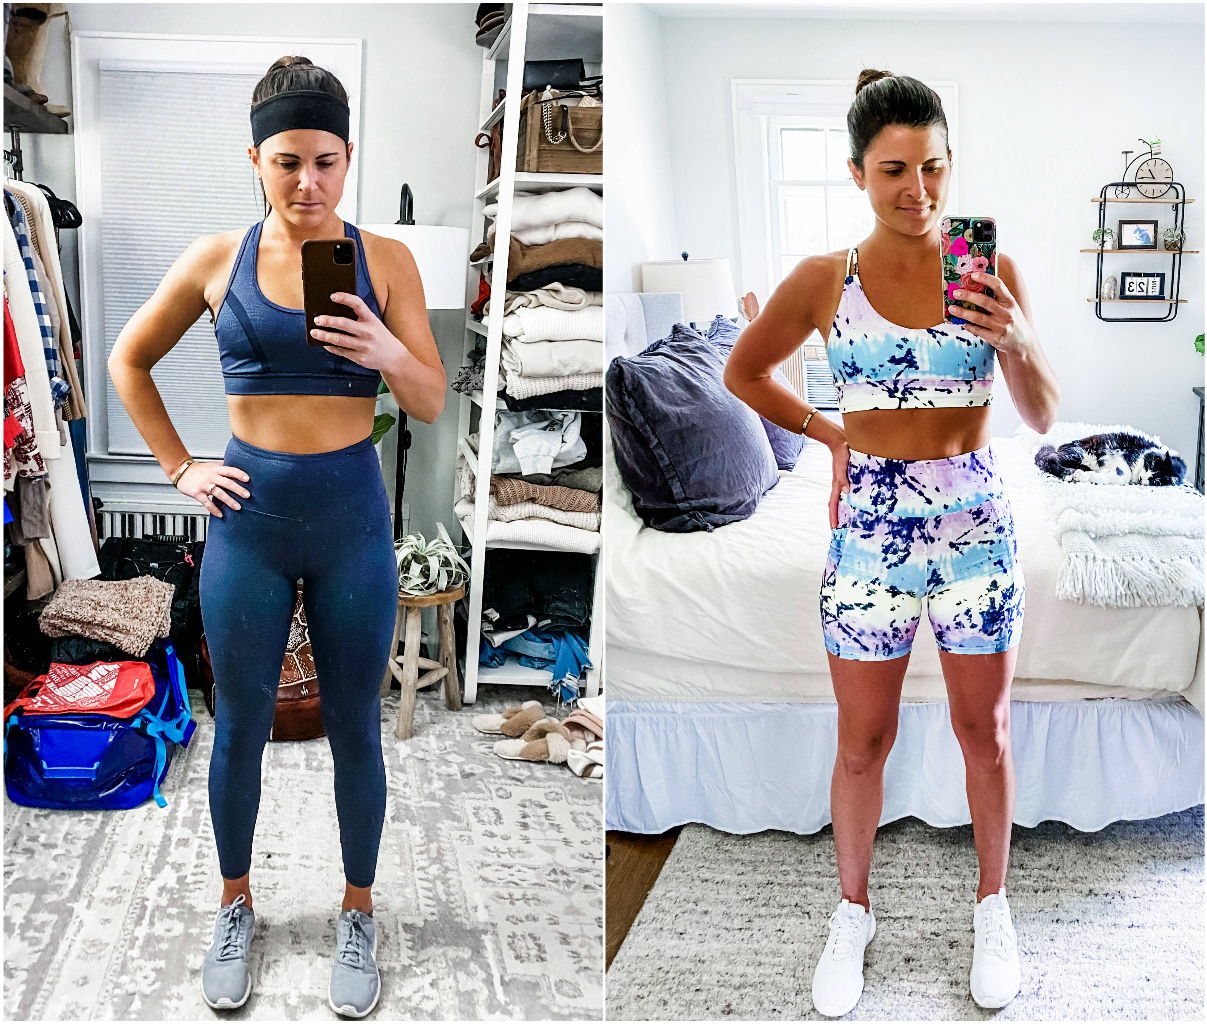 My 10 lbs Fitness Story - To Be Bright